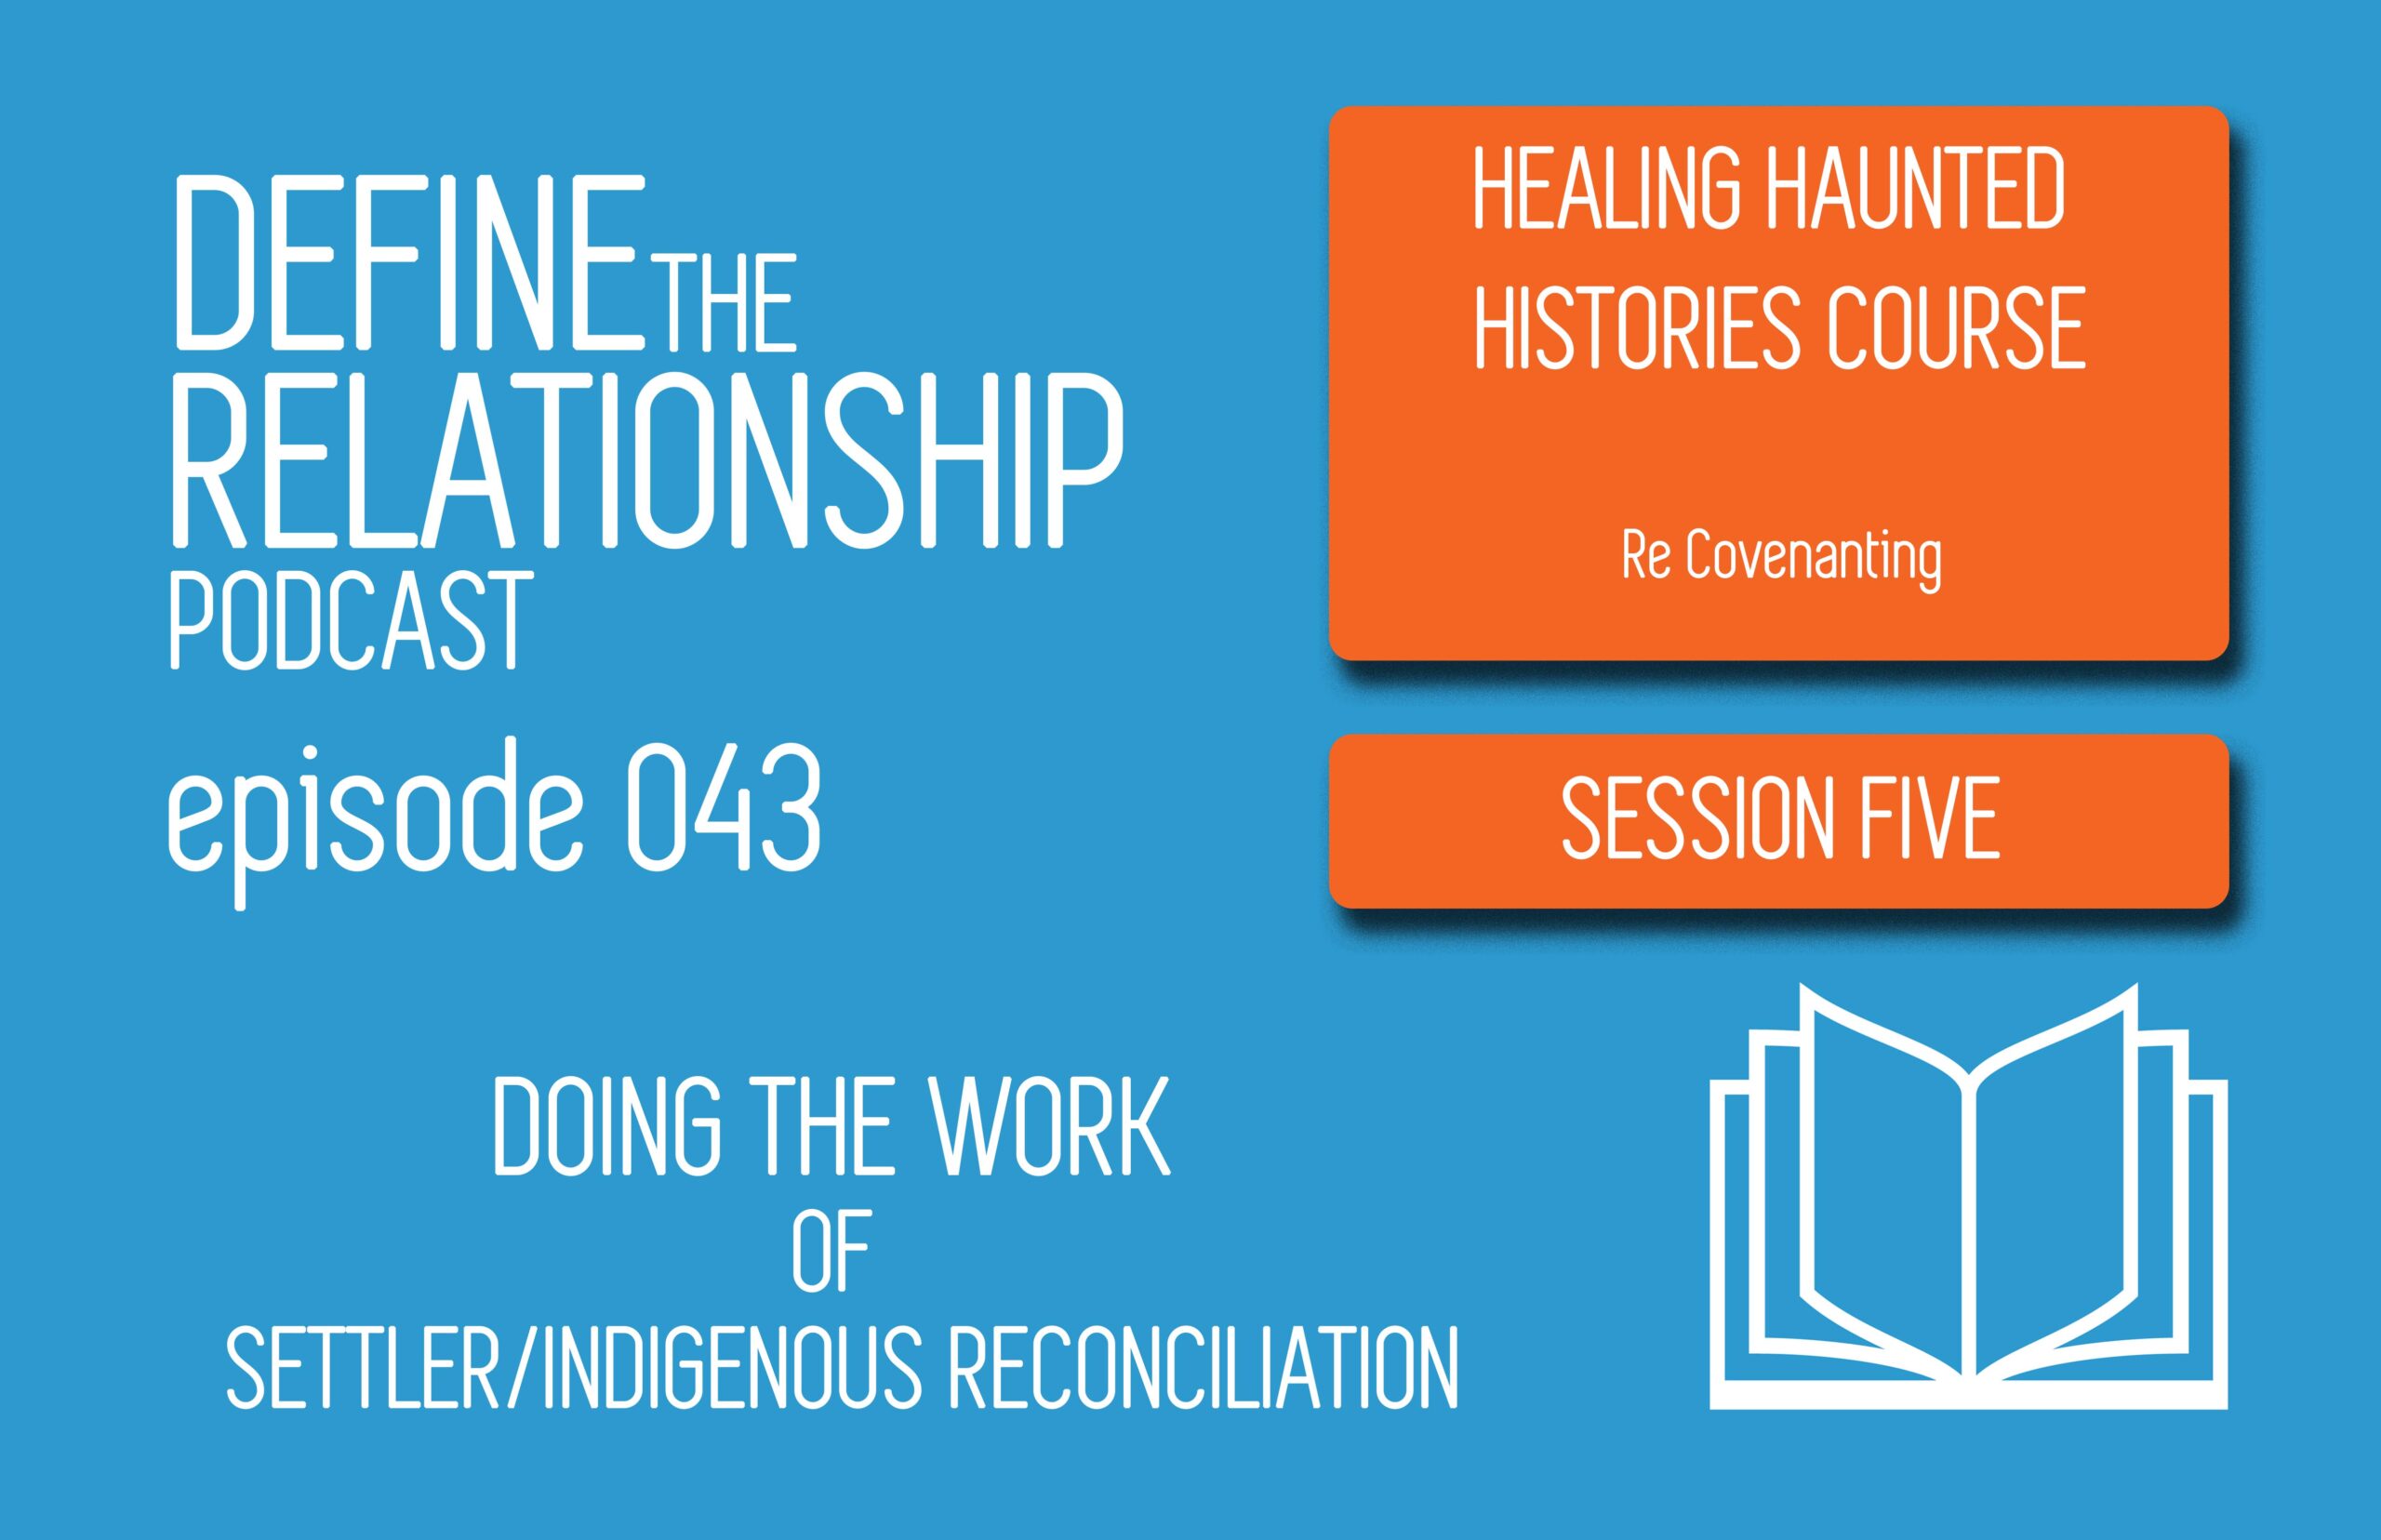 Healing Haunted Histories Course – Session Five – ReCovenanting- Episode 043